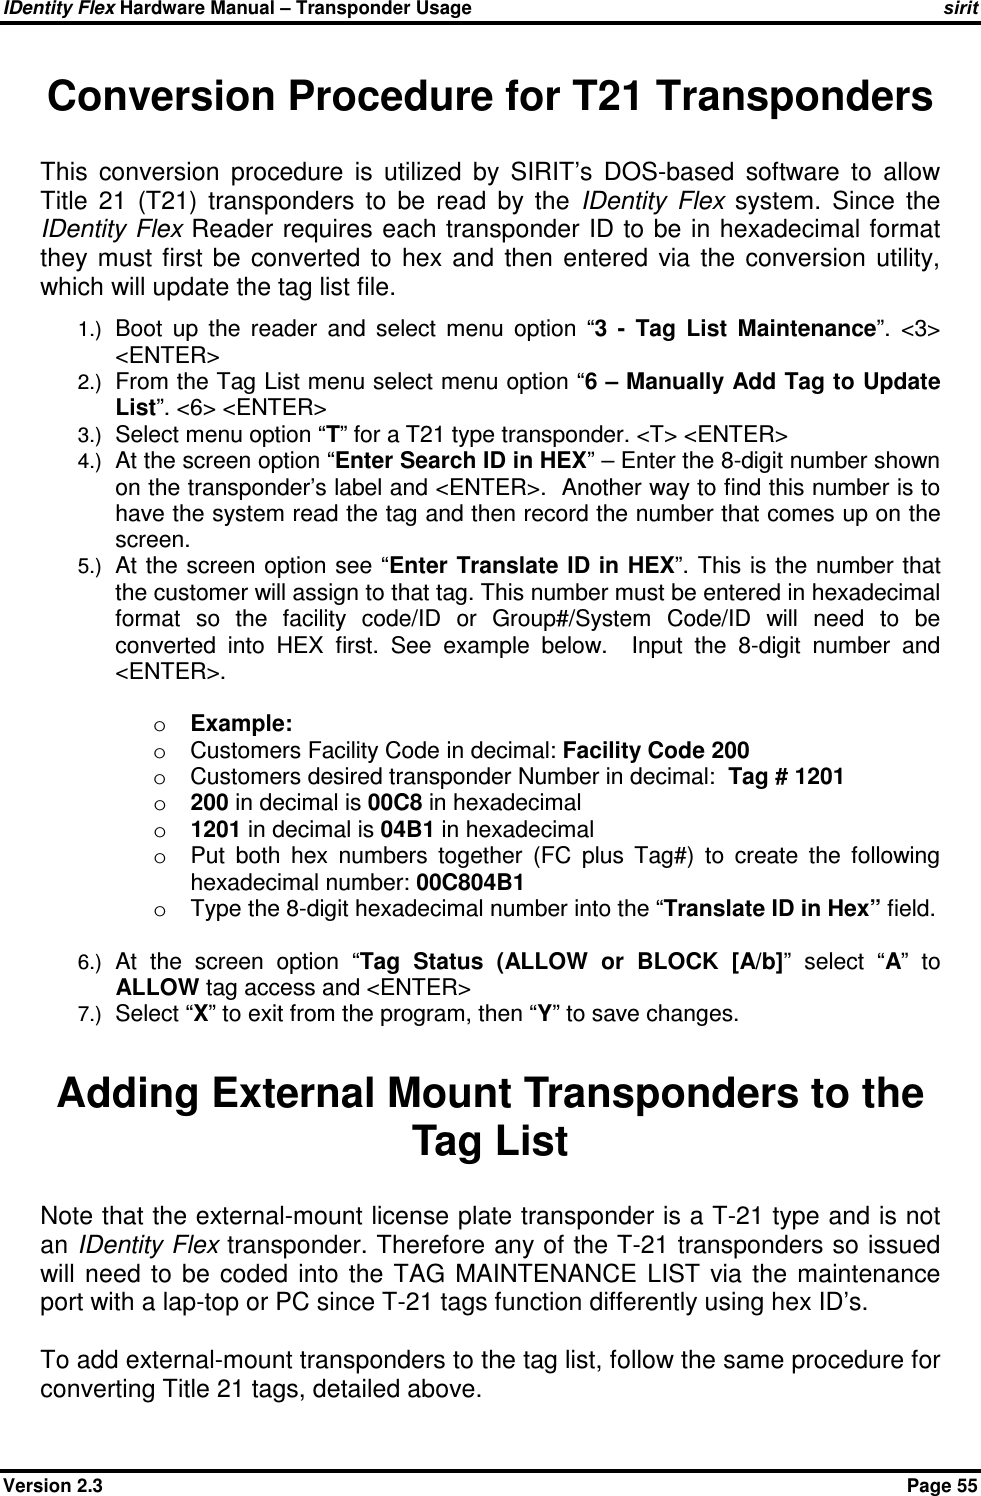 IDentity Flex Hardware Manual – Transponder Usage   sirit Version 2.3    Page 55 Conversion Procedure for T21 Transponders This  conversion  procedure  is  utilized  by  SIRIT’s  DOS-based  software  to  allow Title  21  (T21)  transponders  to  be  read  by  the  IDentity  Flex  system.  Since  the IDentity Flex Reader requires each transponder ID to be in hexadecimal format they  must  first  be  converted  to  hex  and  then  entered  via  the  conversion  utility, which will update the tag list file.   1.) Boot  up  the  reader  and  select  menu  option  “3  -  Tag  List  Maintenance”.  &lt;3&gt; &lt;ENTER&gt; 2.) From the Tag List menu select menu option “6 – Manually Add Tag to Update List”. &lt;6&gt; &lt;ENTER&gt; 3.) Select menu option “T” for a T21 type transponder. &lt;T&gt; &lt;ENTER&gt; 4.) At the screen option “Enter Search ID in HEX” – Enter the 8-digit number shown on the transponder’s label and &lt;ENTER&gt;.  Another way to find this number is to have the system read the tag and then record the number that comes up on the screen. 5.) At the screen option see “Enter Translate ID in HEX”. This is the  number that the customer will assign to that tag. This number must be entered in hexadecimal format  so  the  facility  code/ID  or  Group#/System  Code/ID  will  need  to  be converted  into  HEX  first.  See  example  below.    Input  the  8-digit  number  and &lt;ENTER&gt;.  o Example:  o  Customers Facility Code in decimal: Facility Code 200 o  Customers desired transponder Number in decimal:  Tag # 1201 o 200 in decimal is 00C8 in hexadecimal o 1201 in decimal is 04B1 in hexadecimal  o  Put  both  hex  numbers  together  (FC  plus  Tag#)  to  create  the  following hexadecimal number: 00C804B1 o  Type the 8-digit hexadecimal number into the “Translate ID in Hex” field.  6.) At  the  screen  option  “Tag  Status  (ALLOW  or  BLOCK  [A/b]”  select  “A”  to ALLOW tag access and &lt;ENTER&gt; 7.) Select “X” to exit from the program, then “Y” to save changes.           Adding External Mount Transponders to the Tag List Note that the external-mount license plate transponder is a T-21 type and is not an IDentity Flex transponder. Therefore any of the T-21 transponders so issued will  need  to  be  coded  into  the  TAG  MAINTENANCE  LIST  via  the  maintenance port with a lap-top or PC since T-21 tags function differently using hex ID’s.   To add external-mount transponders to the tag list, follow the same procedure for converting Title 21 tags, detailed above. 